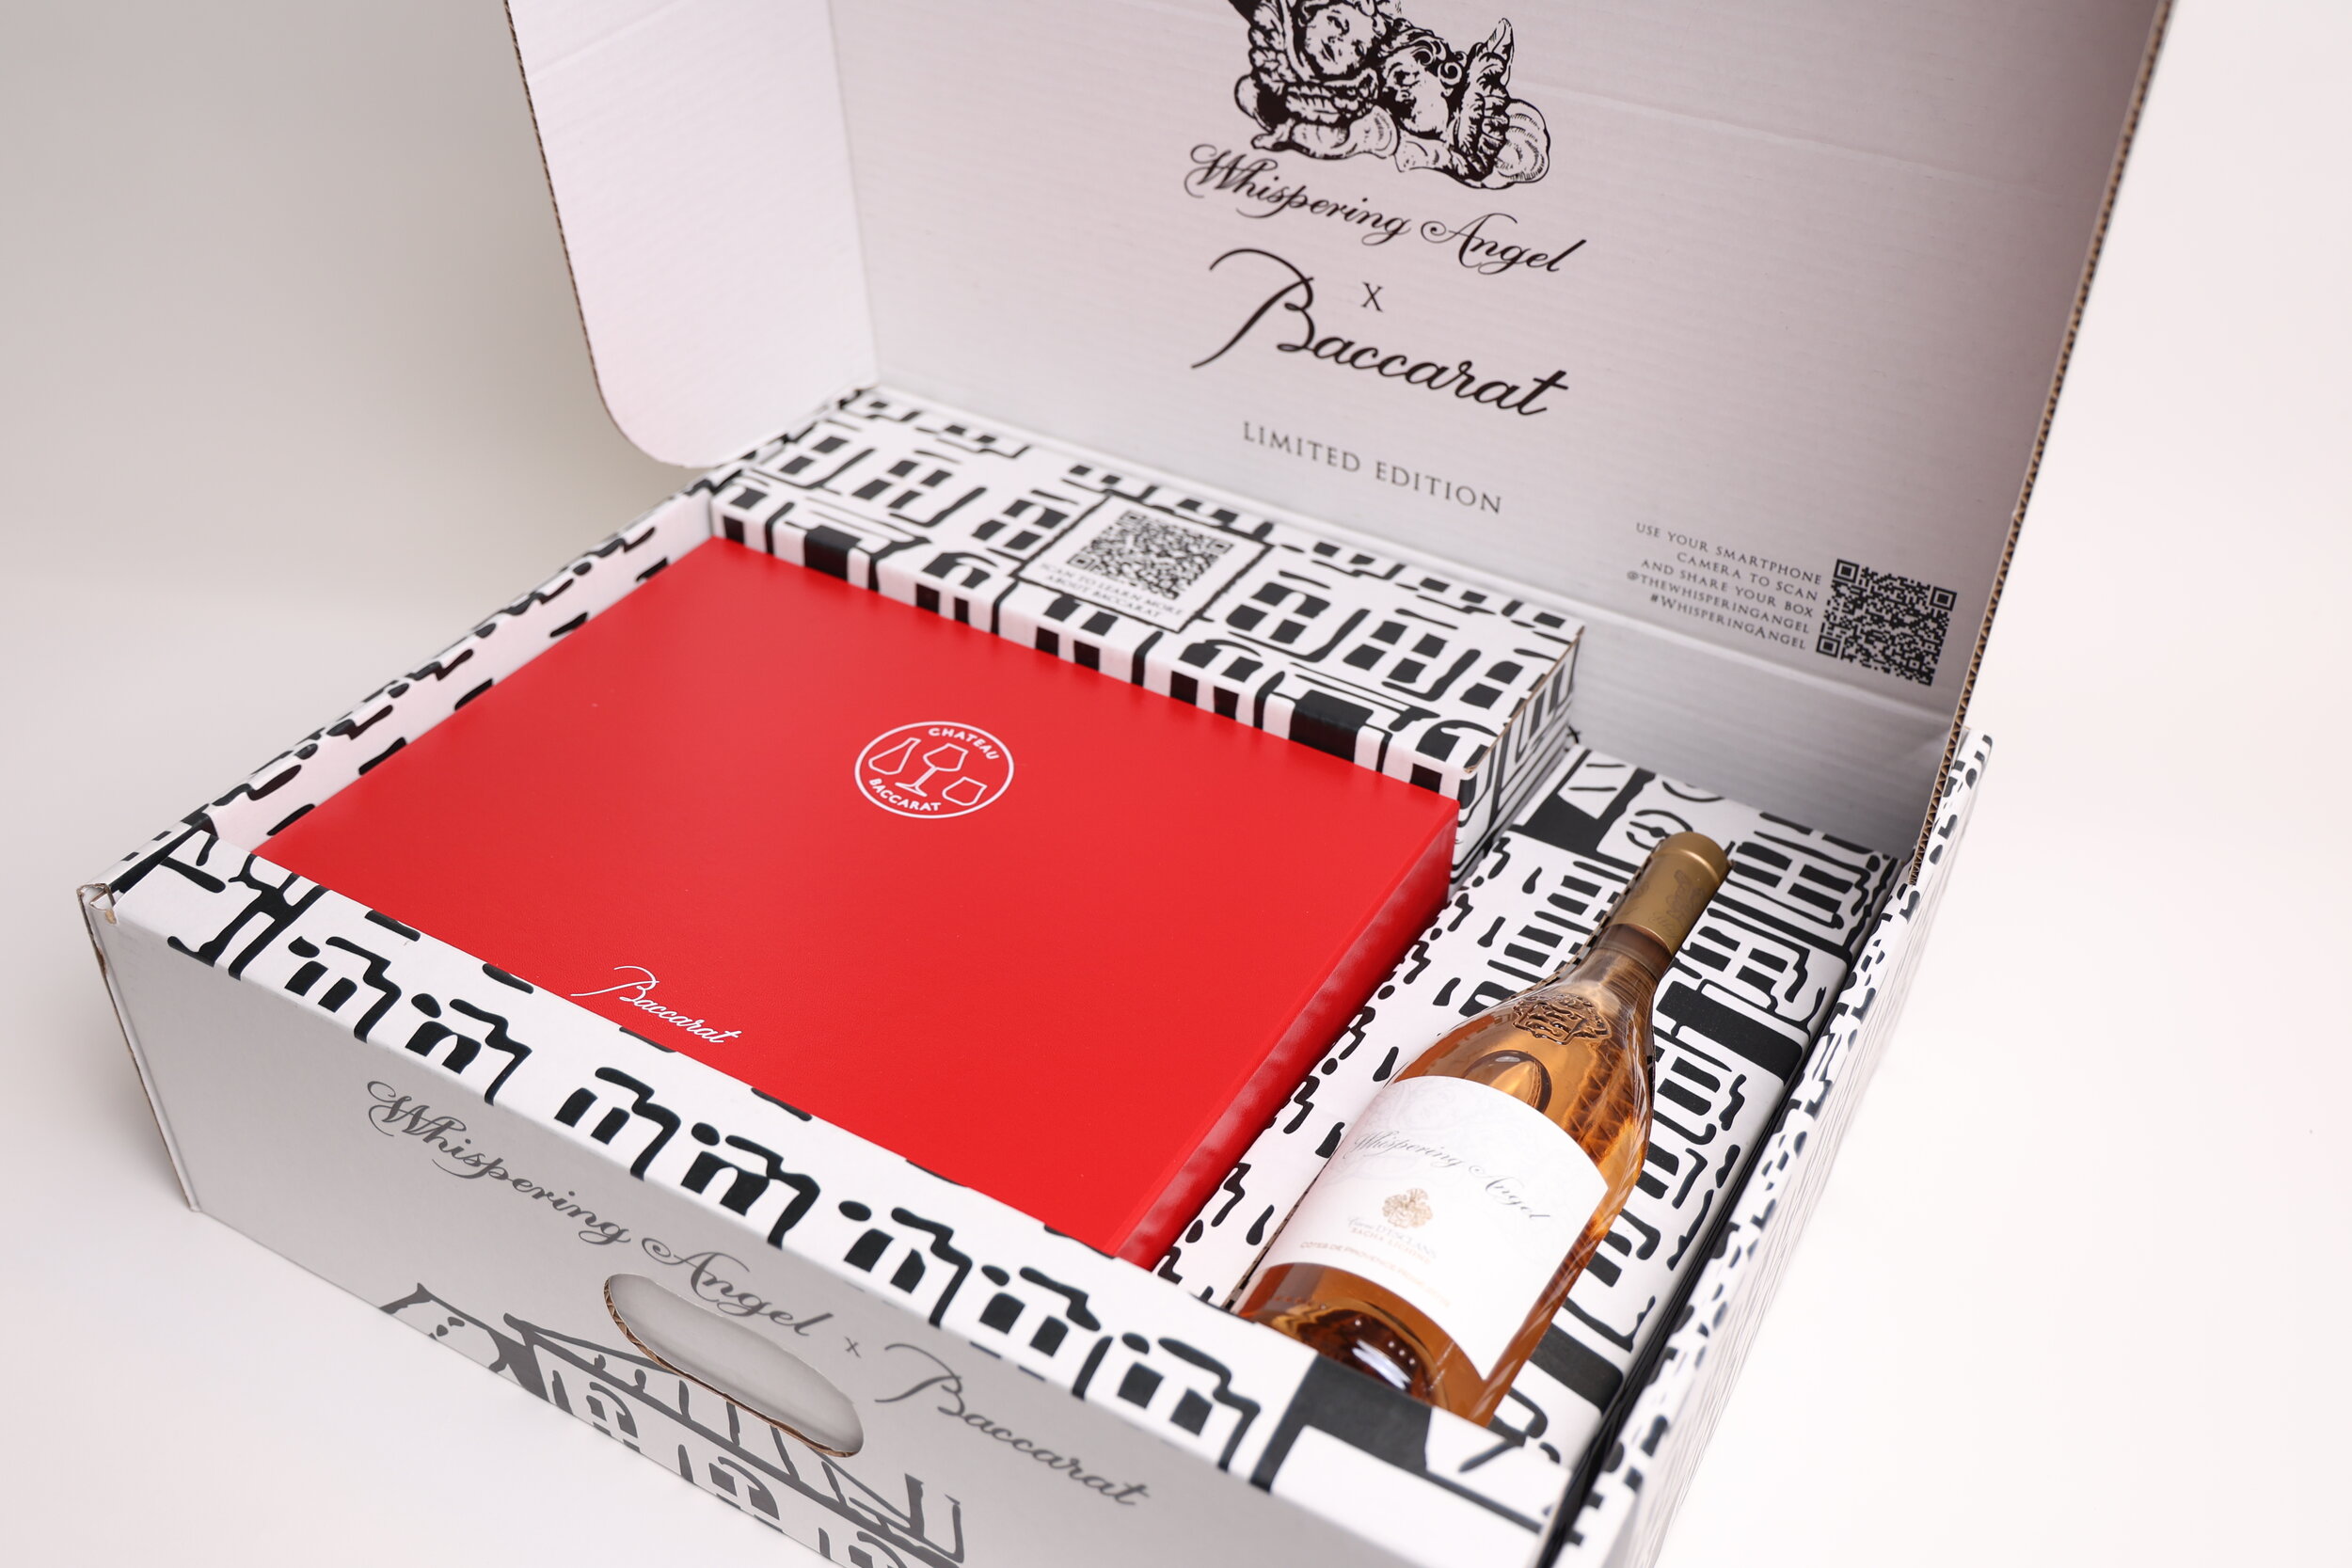  Just in time for&nbsp;Valentine’s Day, the global reference for Provence Rosé&nbsp;Whispering Angel&nbsp;has partnered with French crystal maker&nbsp;Baccarat&nbsp;for a limited-edition gift set.&nbsp;  The set features an artfully designed box insp